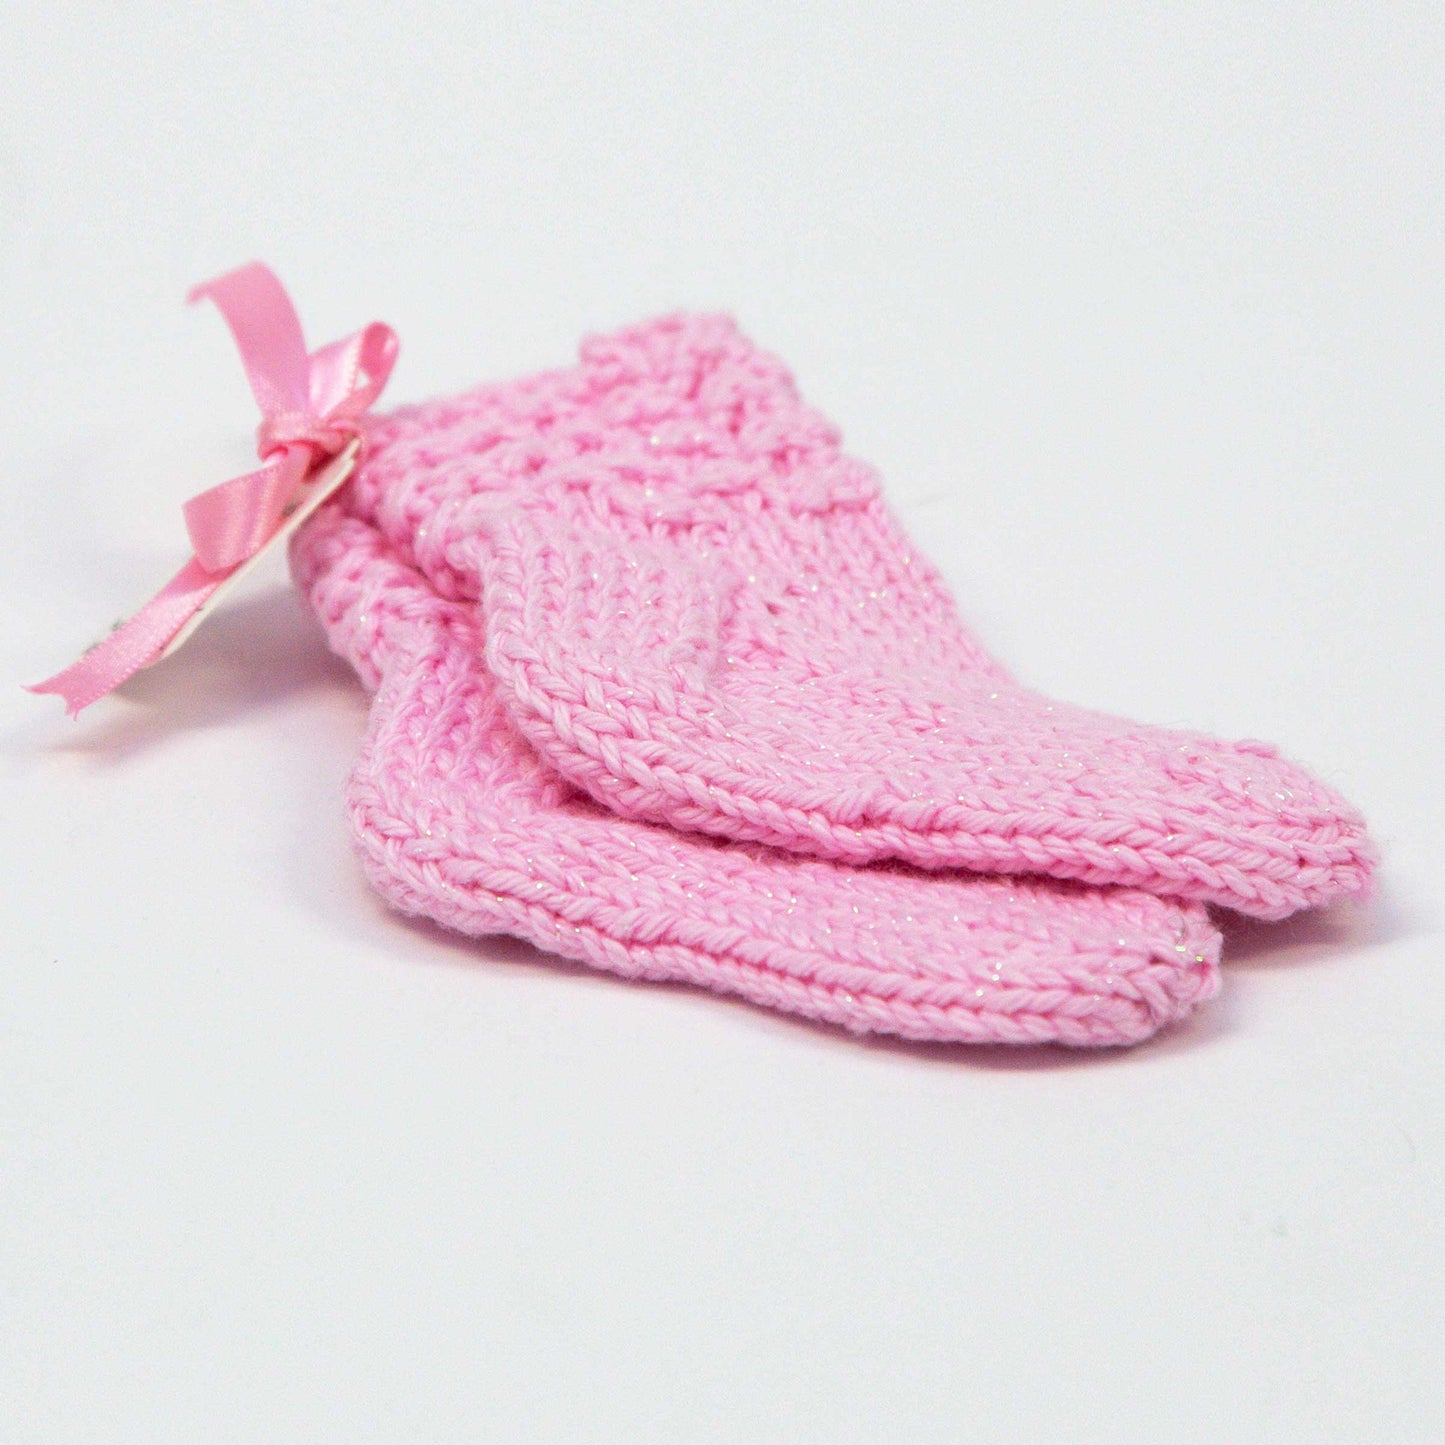 Baby Booties, 0-3 months, Hand Knit, Cotton, No Seam, Washable, Pink